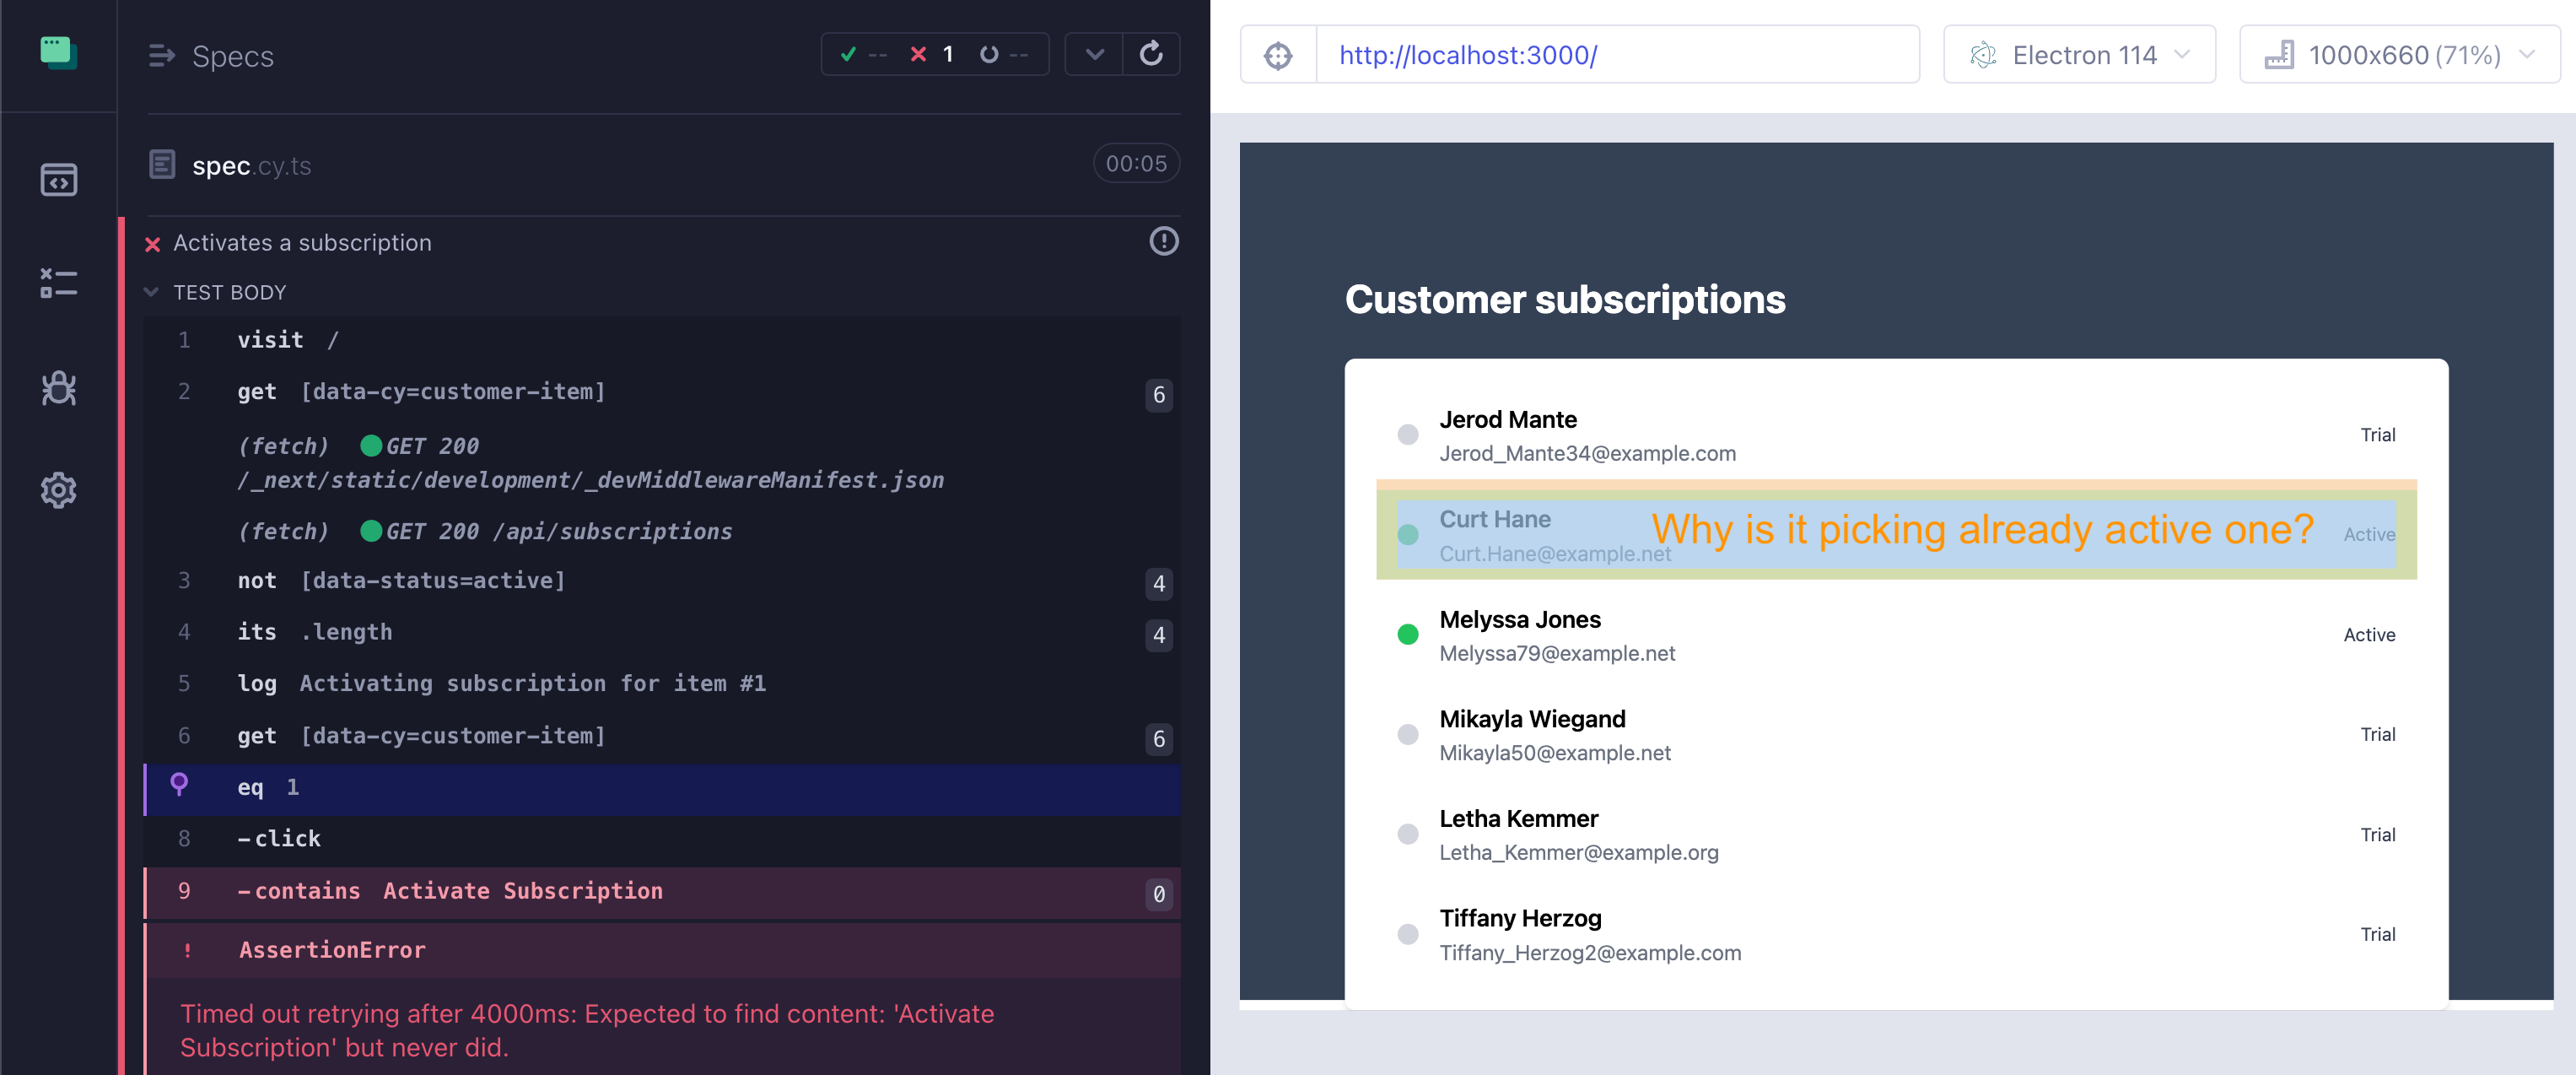 Why is it picking the active subscription to try to activate it?